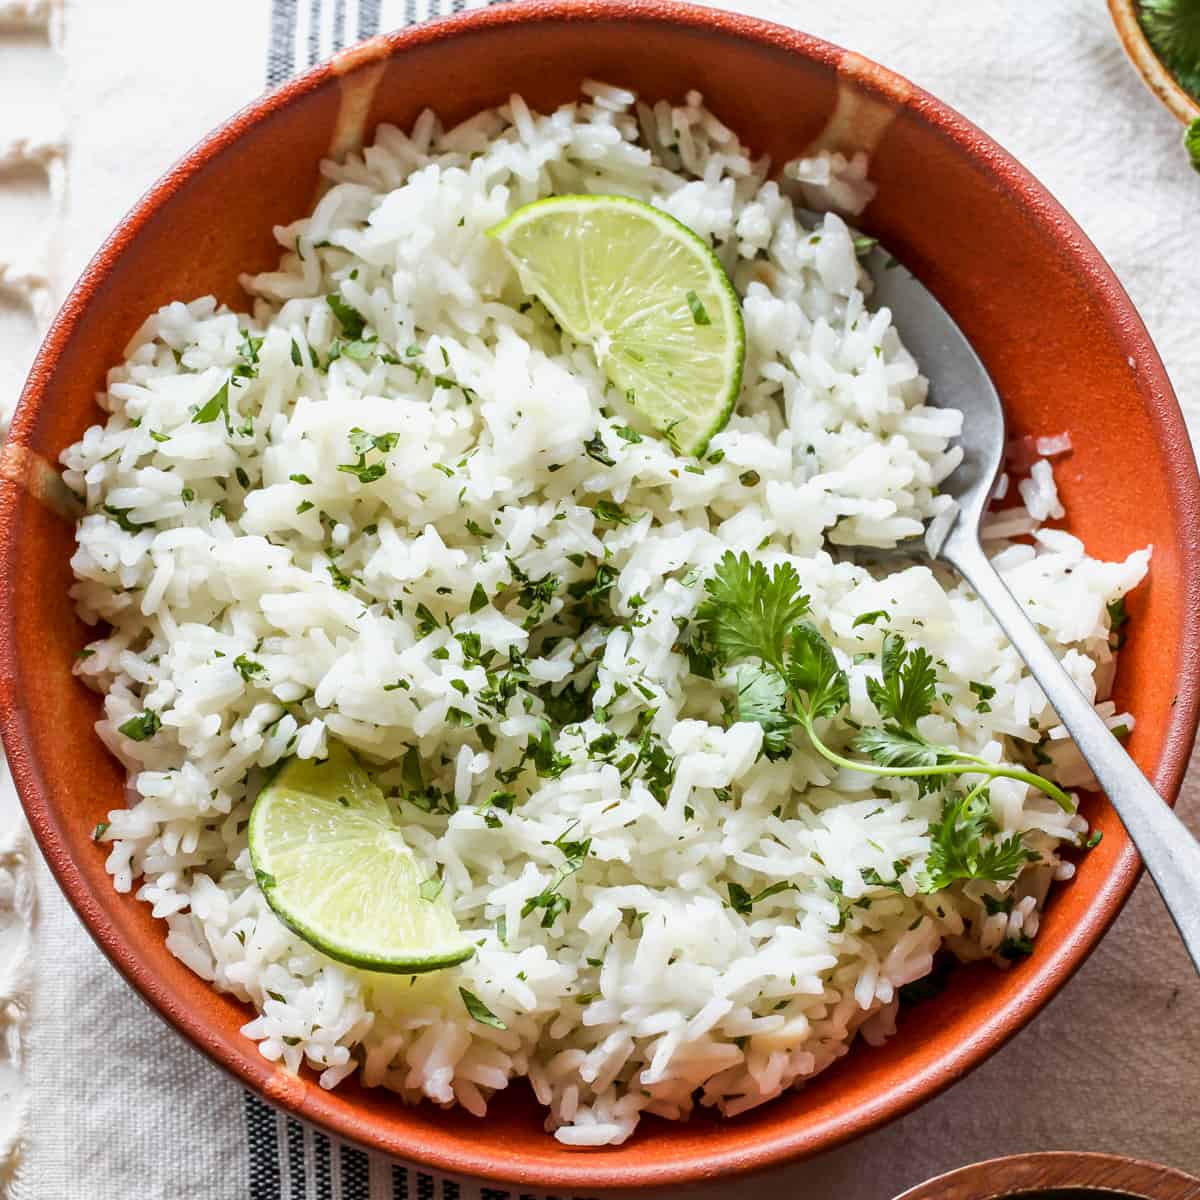 overhead view of a bowl of Cilantro Lime Rice garnished with cilantro and limes with a spoon in it